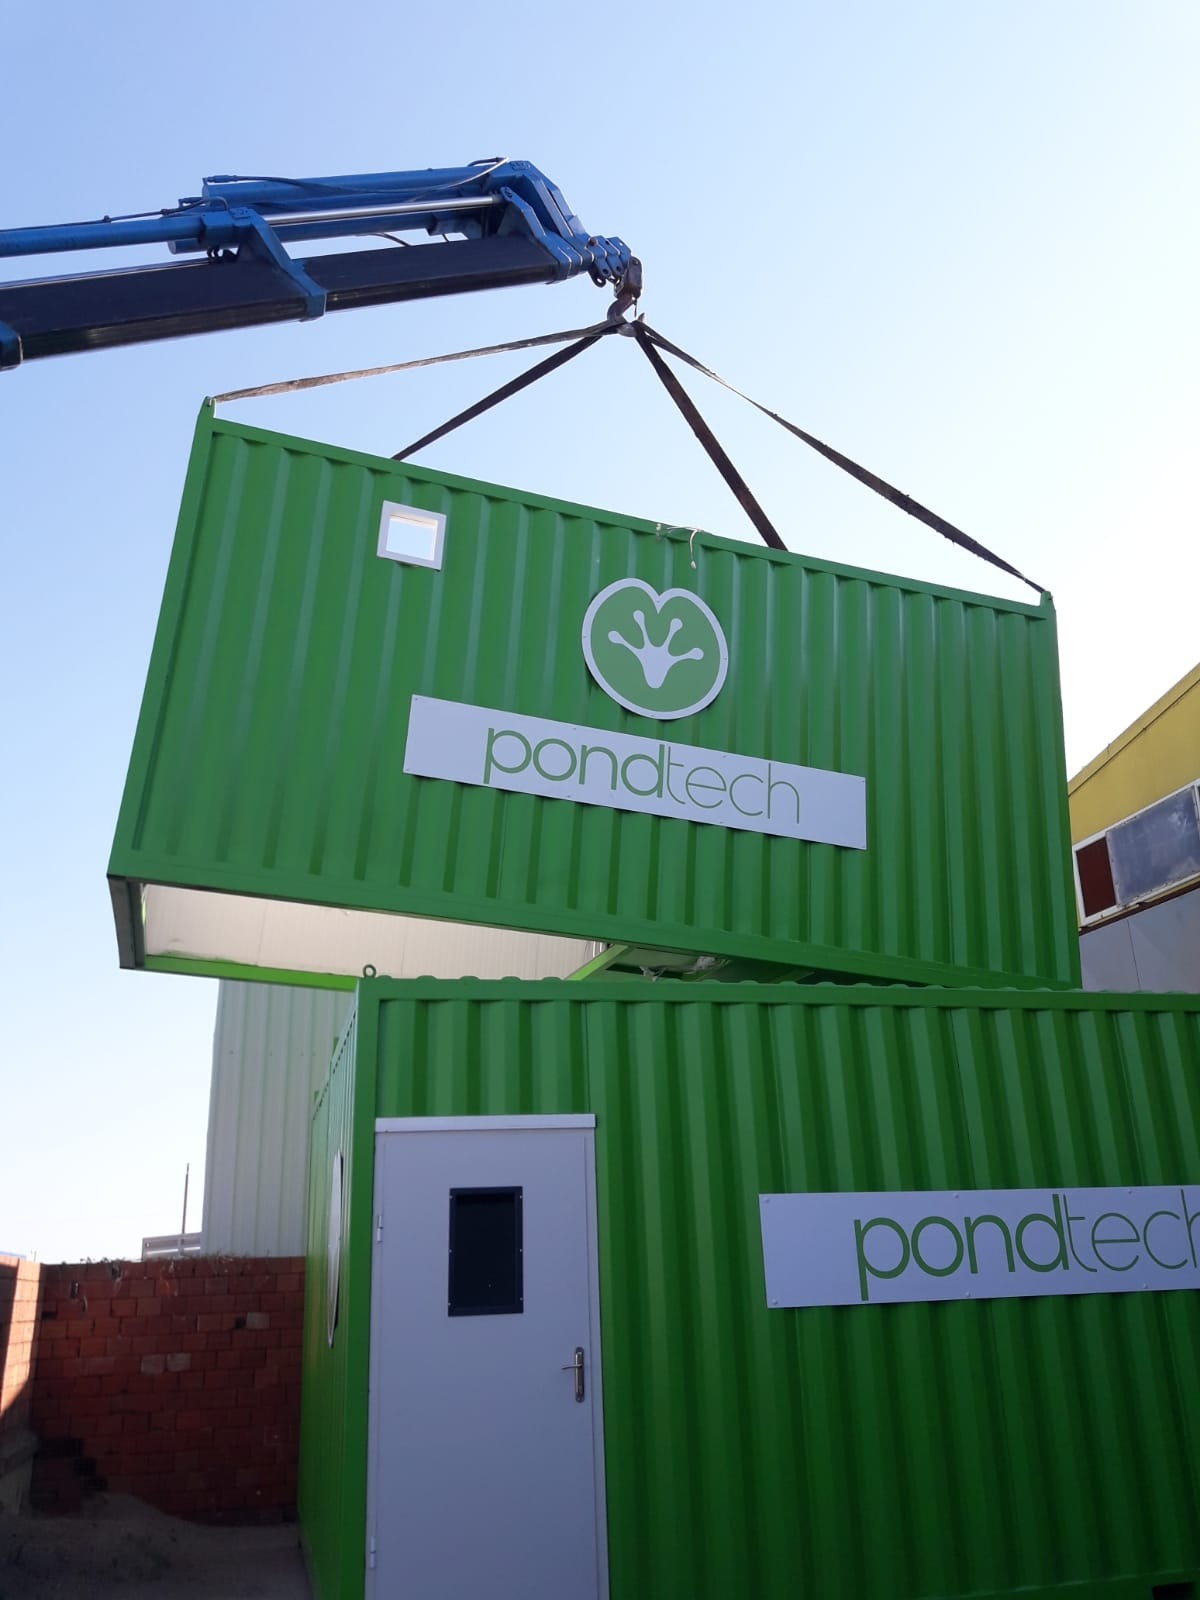 Pond Technologies Holdings Inc., Tuesday, October 6, 2020, Press release picture